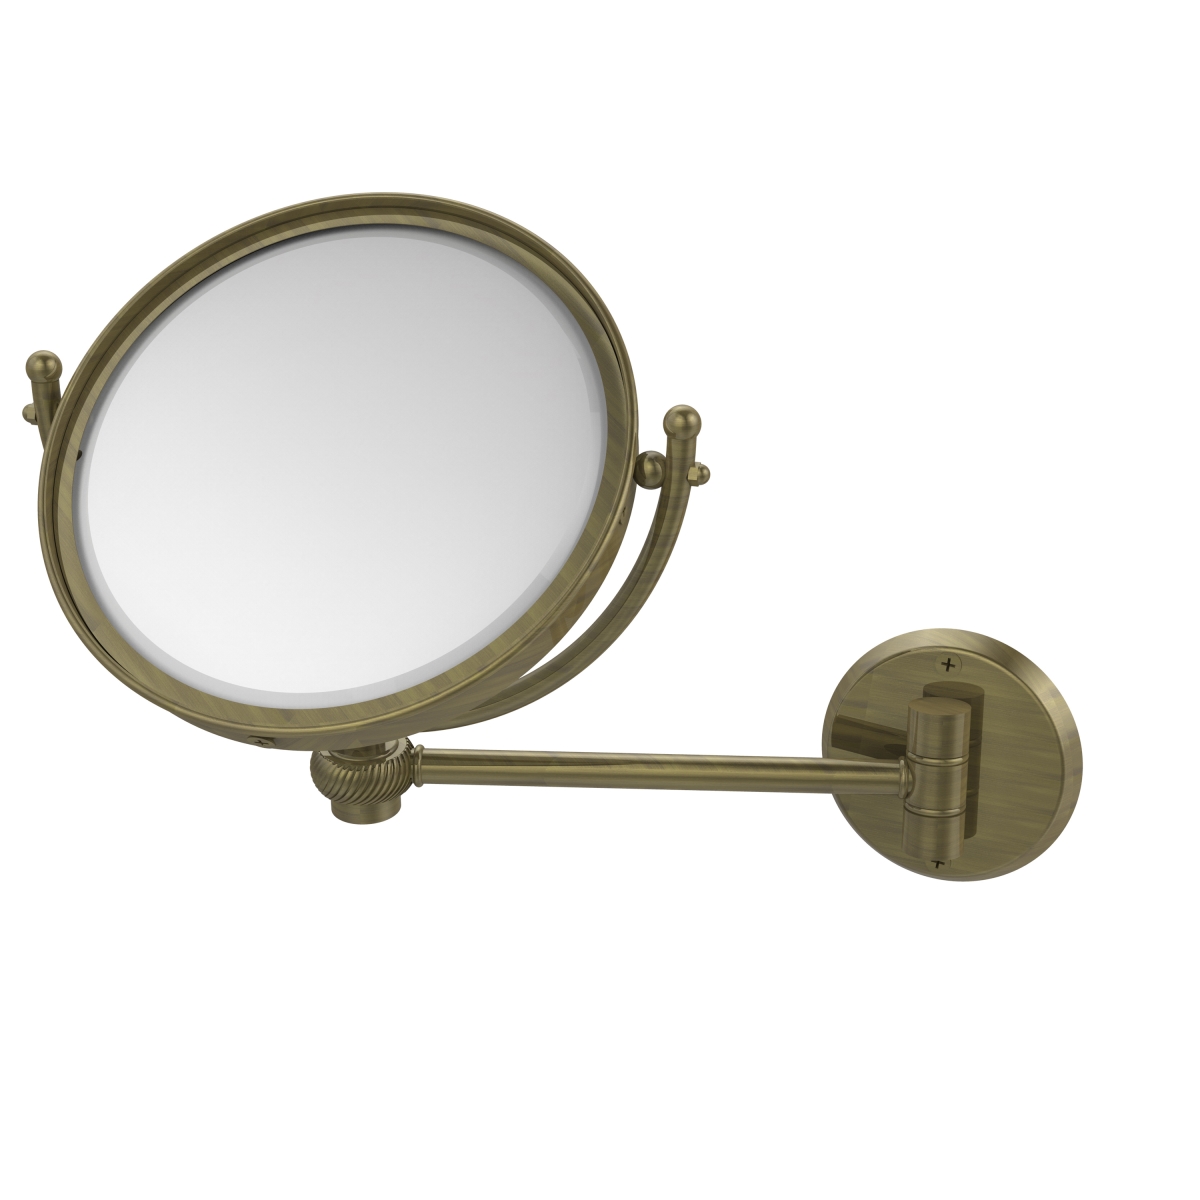 WM-5T-4X-ABR 8 in. Wall Mounted Make-Up Mirror 4X Magnification, Antique Brass - 10 x 8 x 11 in -  Allied Brass, WM-5T/4X-ABR